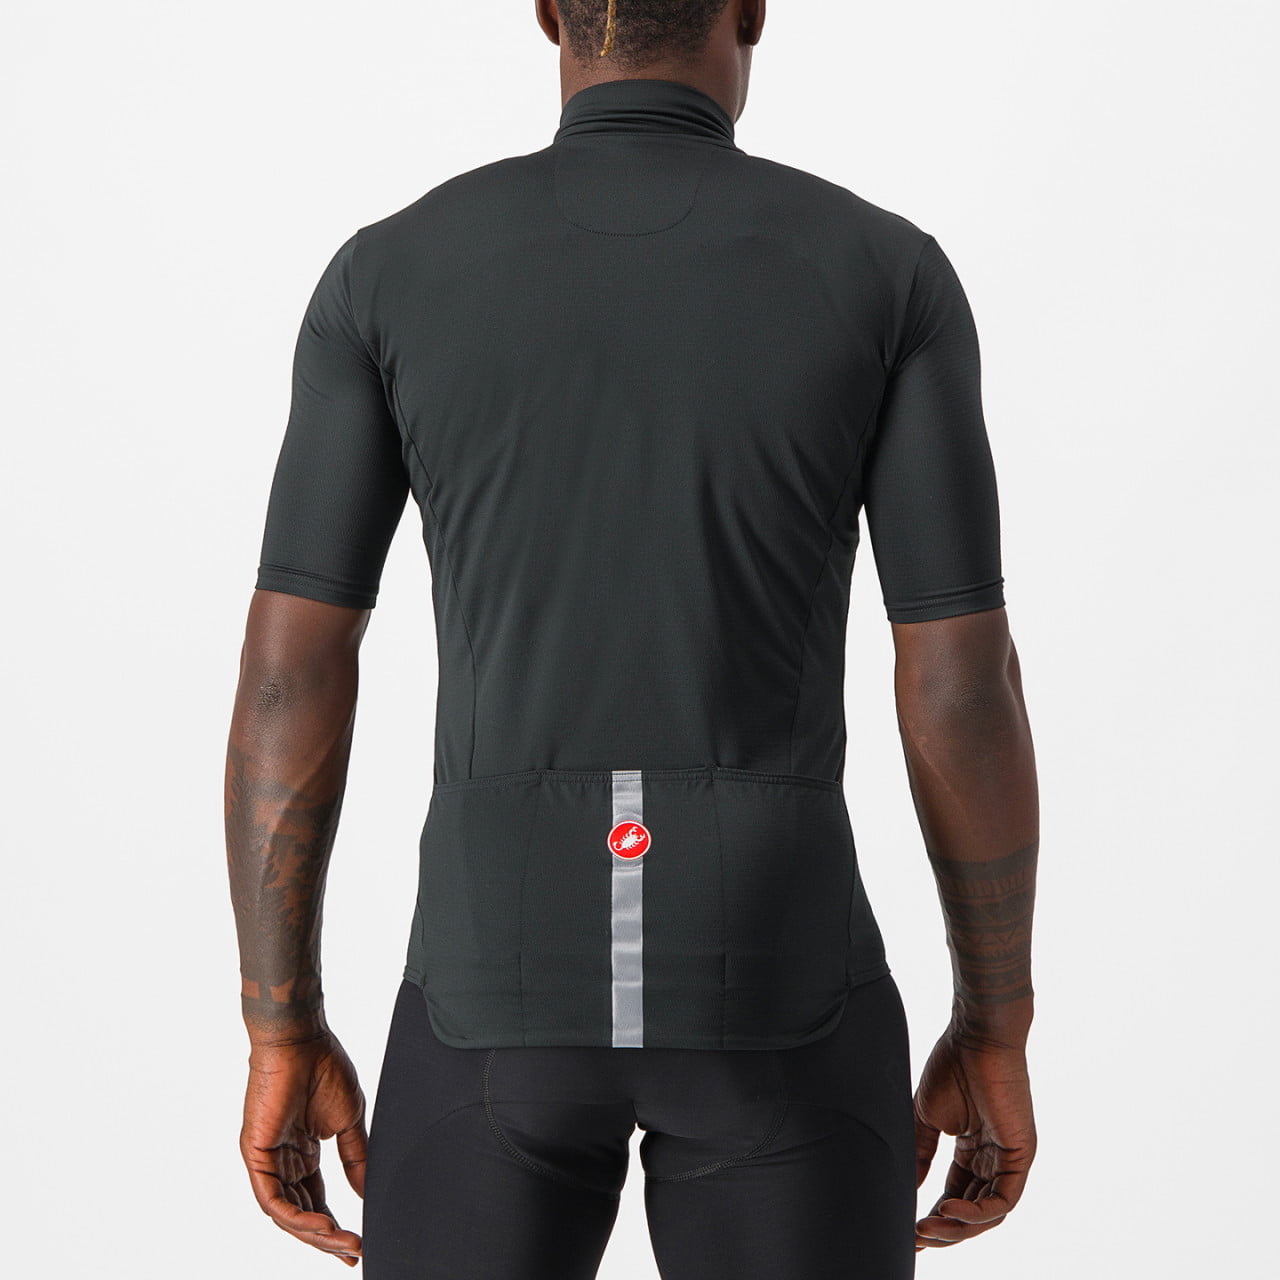 Pro Thermal Mid short-sleeved jersey